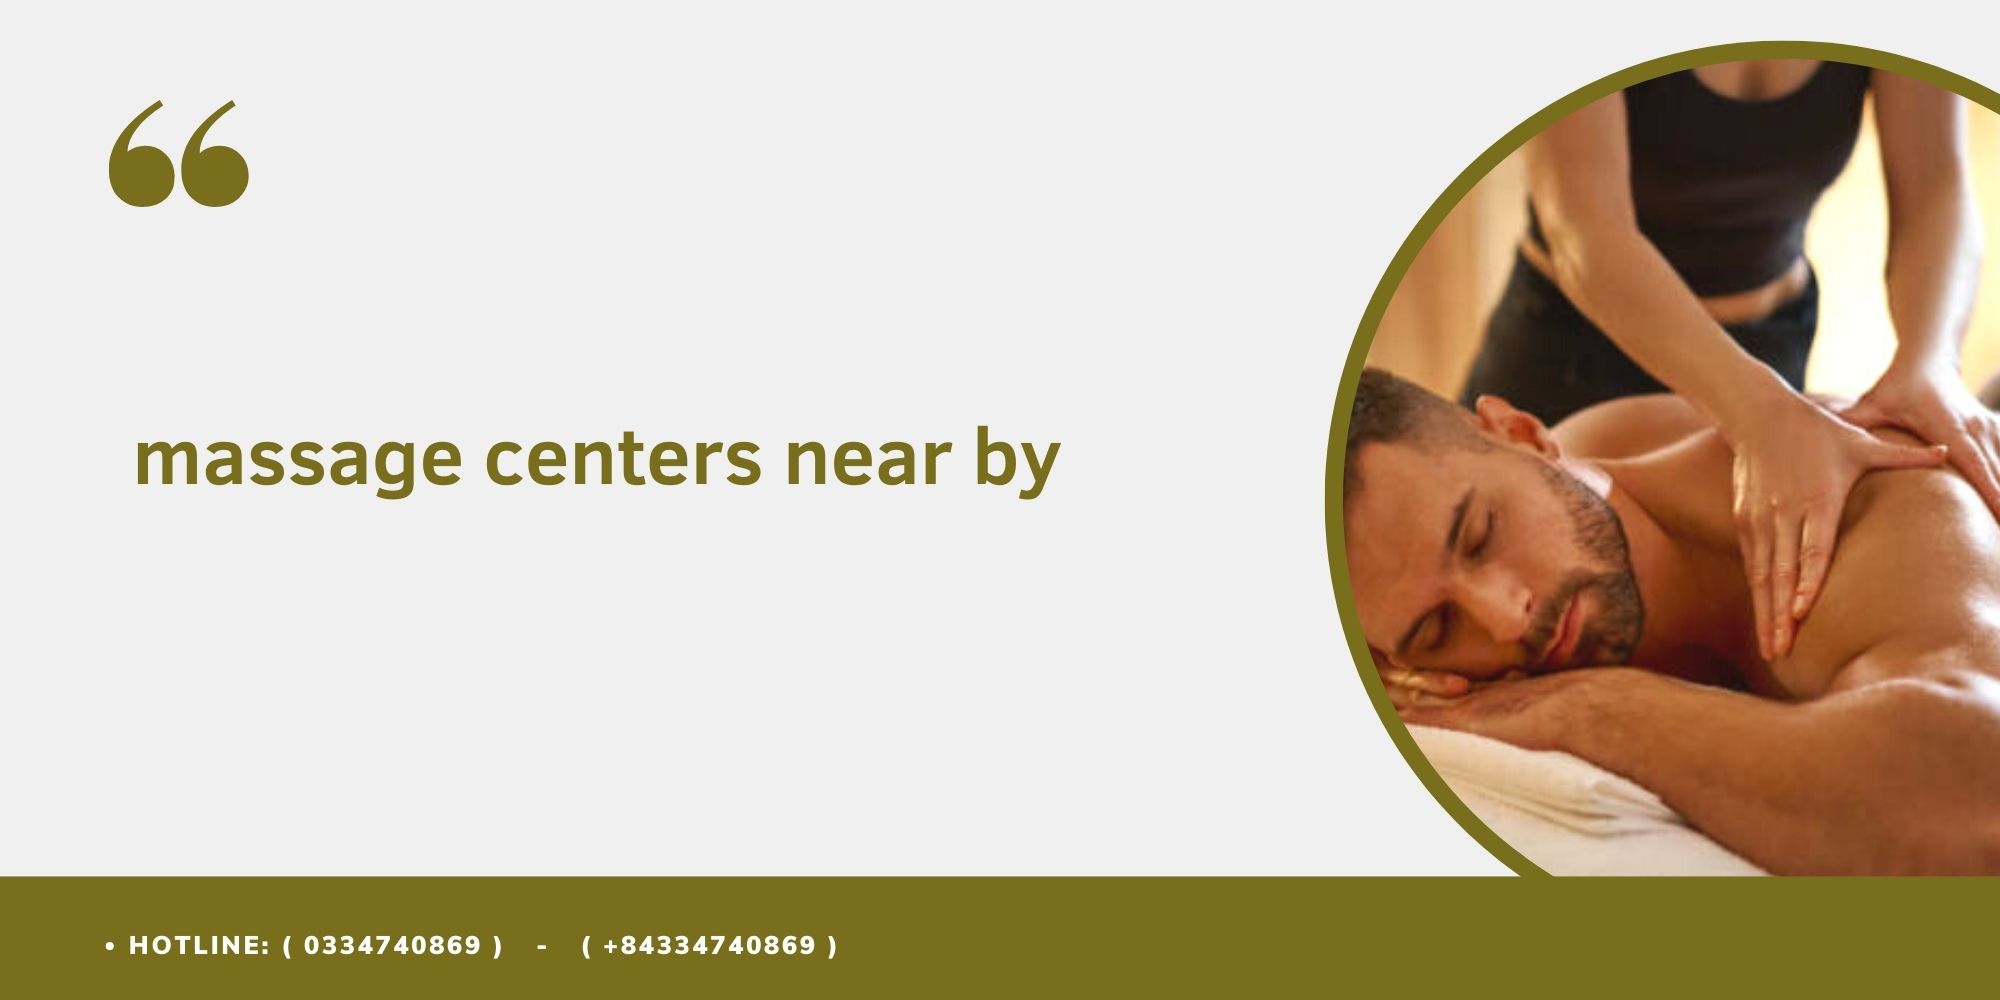 massage centers near by